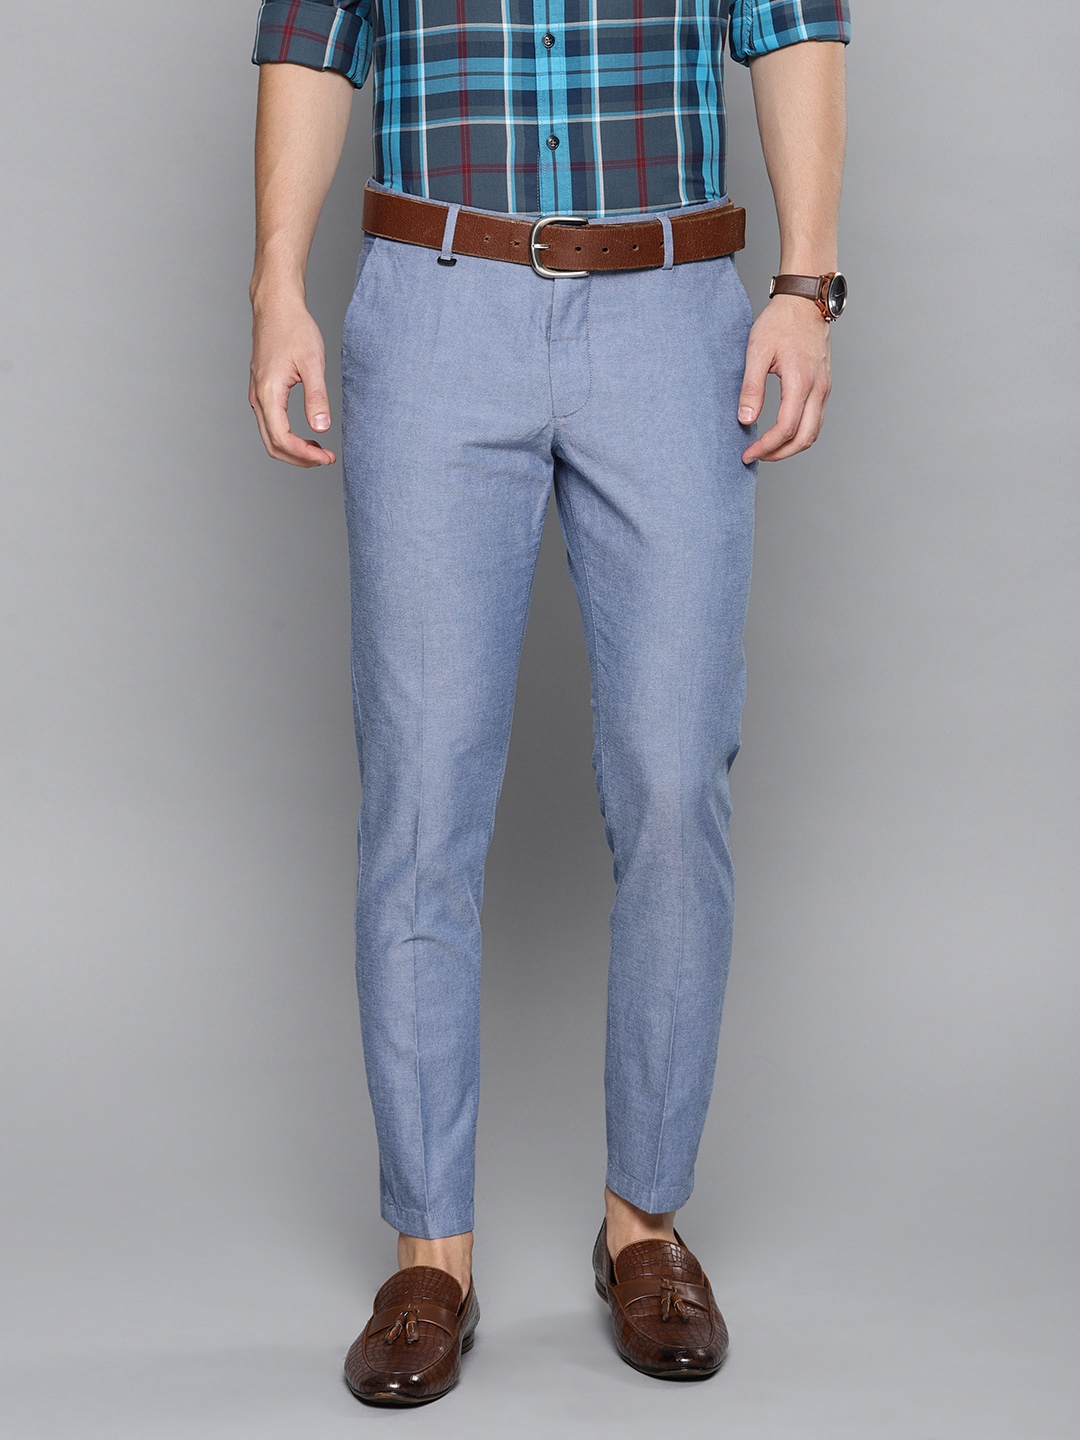 Buy Louis Philippe Sport Men's Comfy Tapered Casual Trousers  (LYTF318S004950_Blue_36) at